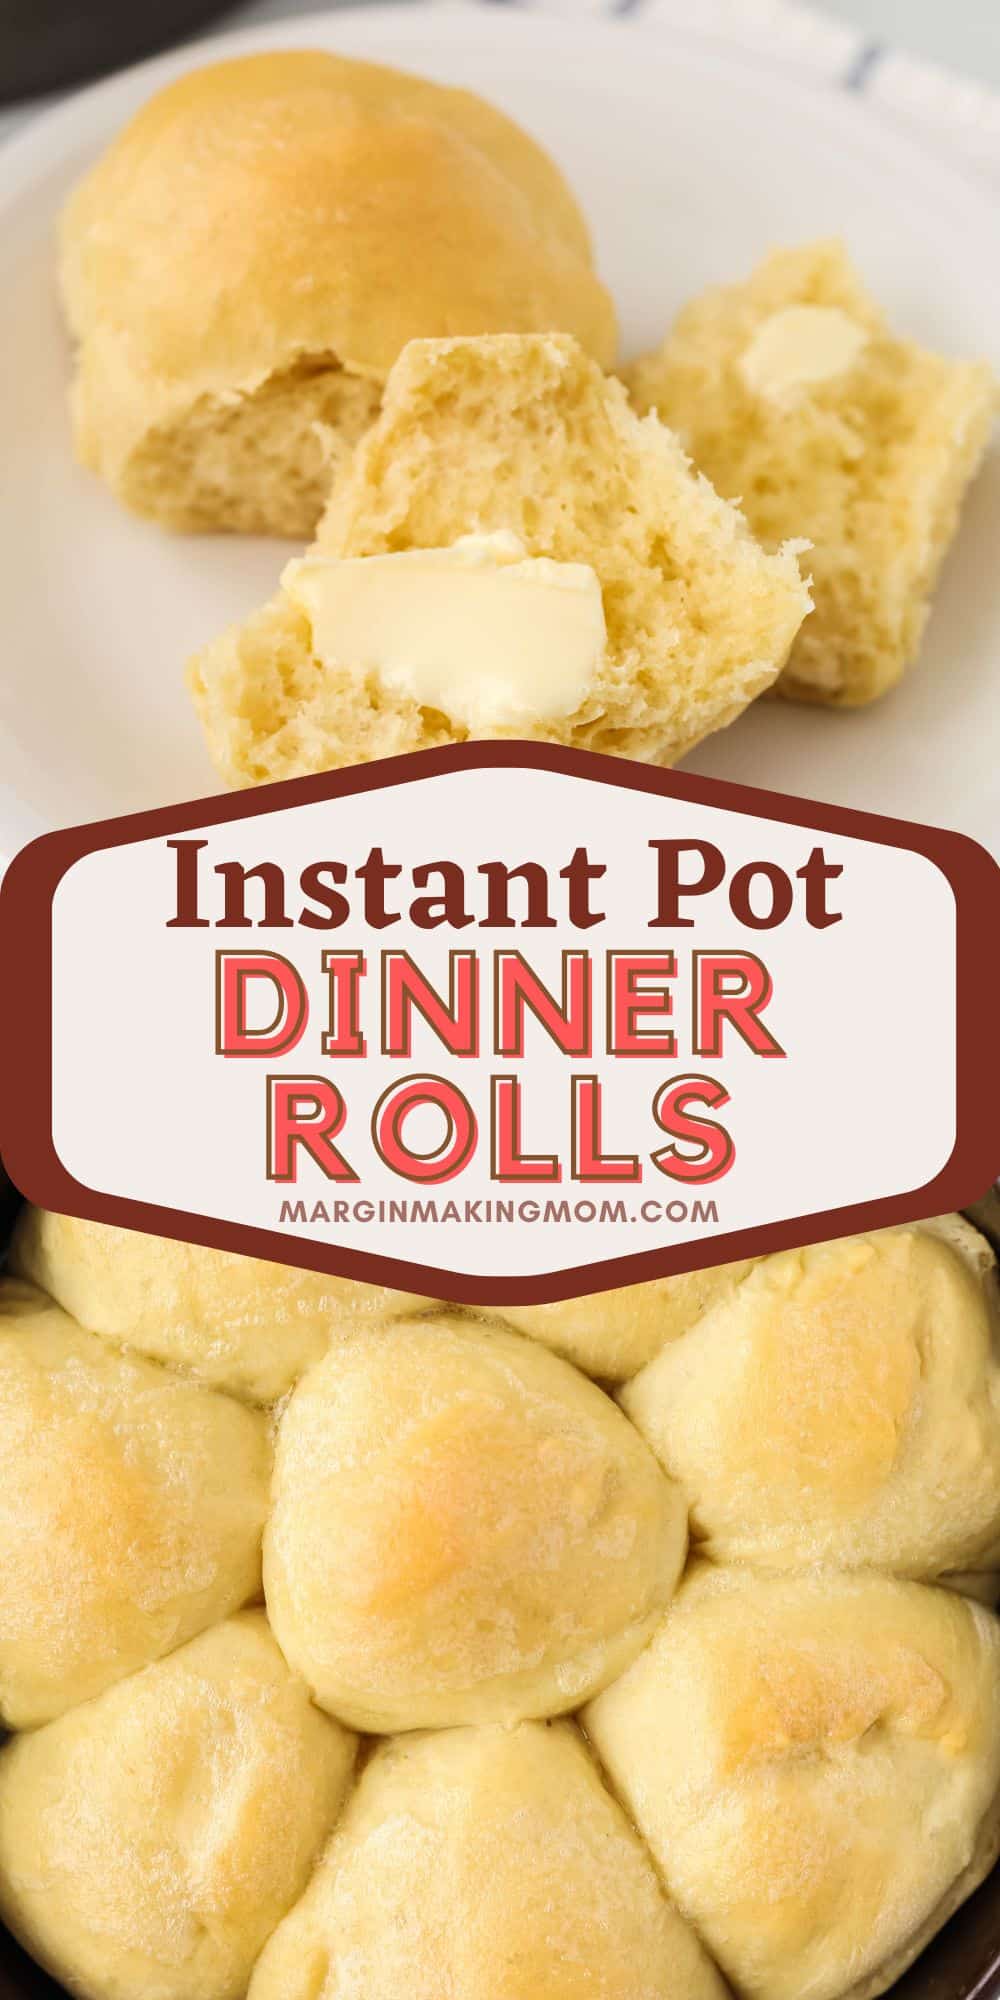 two photos showing Instant Pot dinner rolls; one shows a roll buttered, the other shows a pan of rolls.